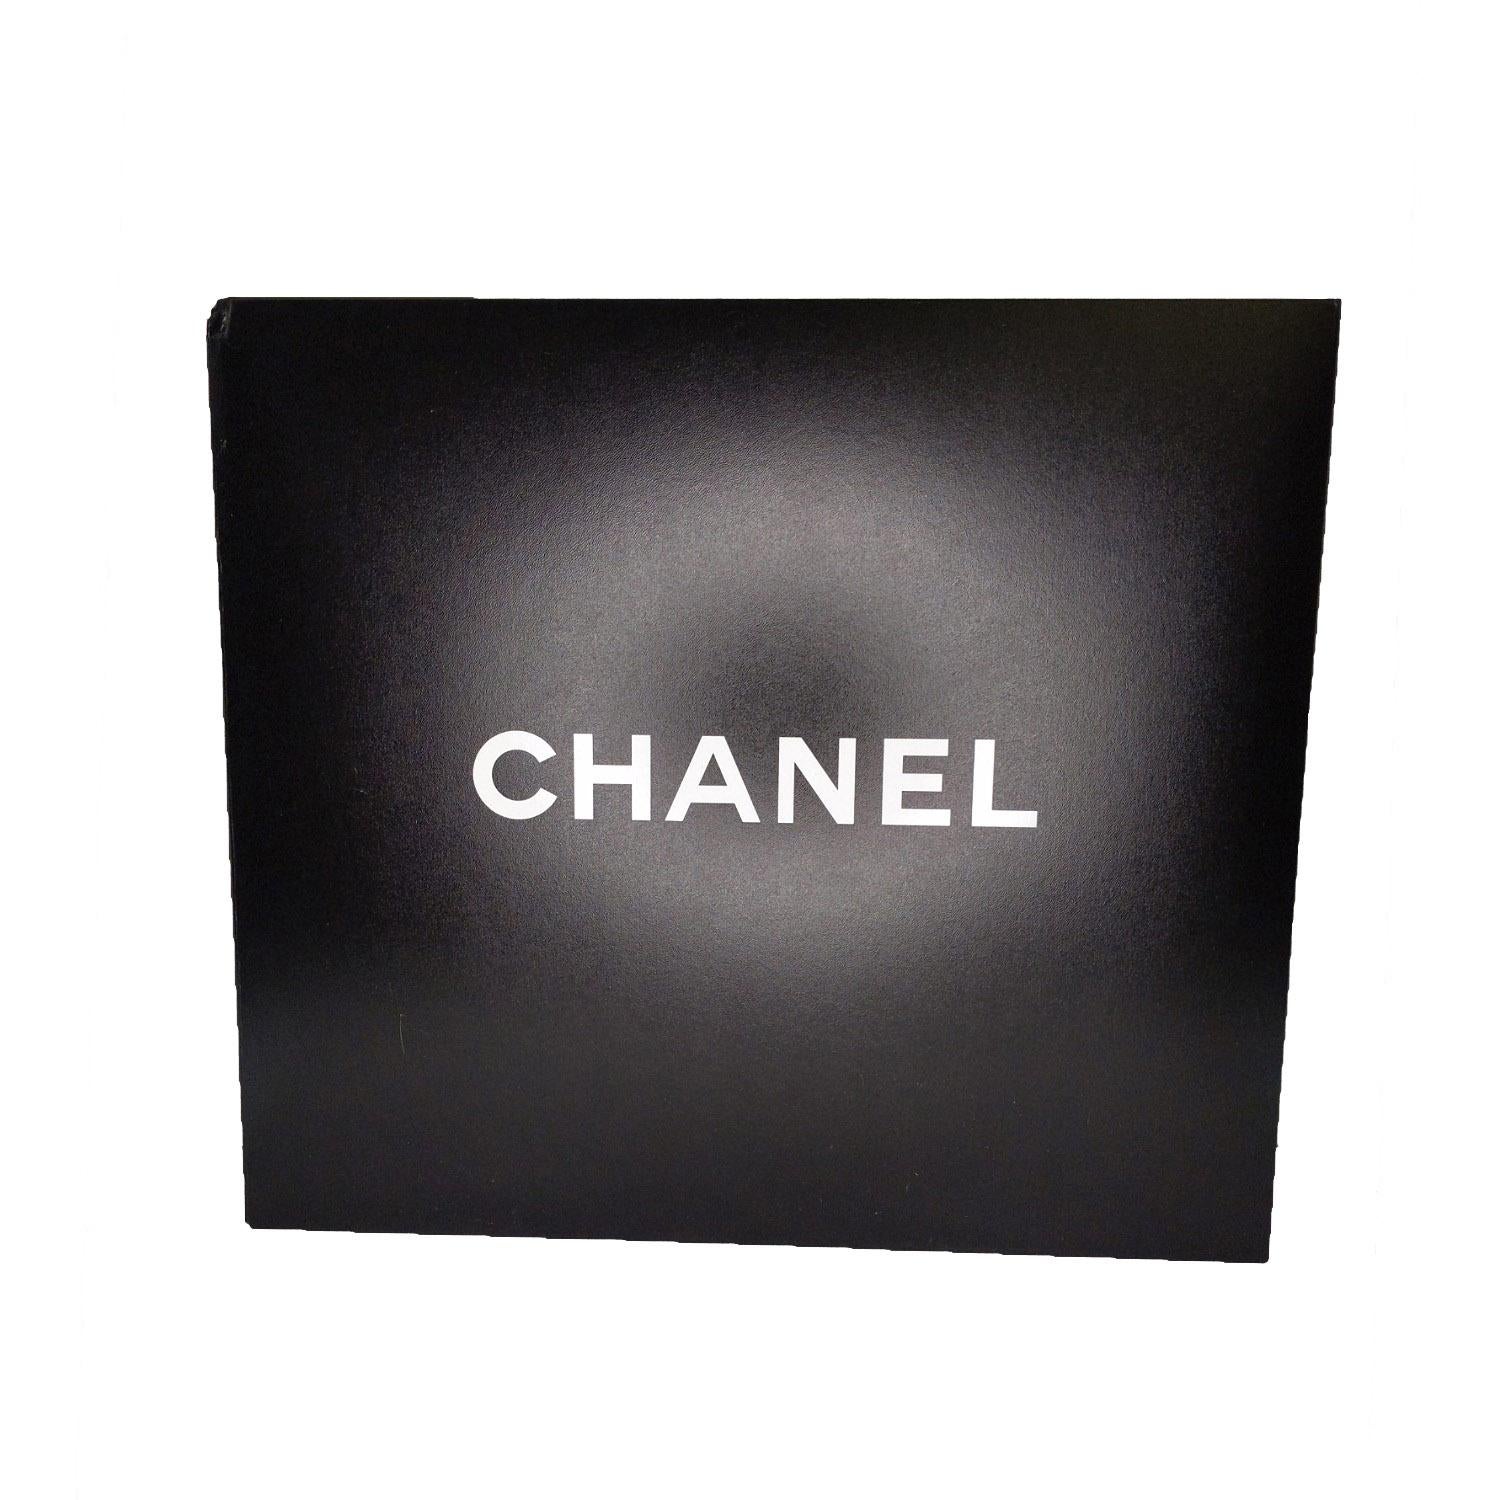 Chanel Toile Rubber Leather Large Zipped Airline Shopping Bag 1